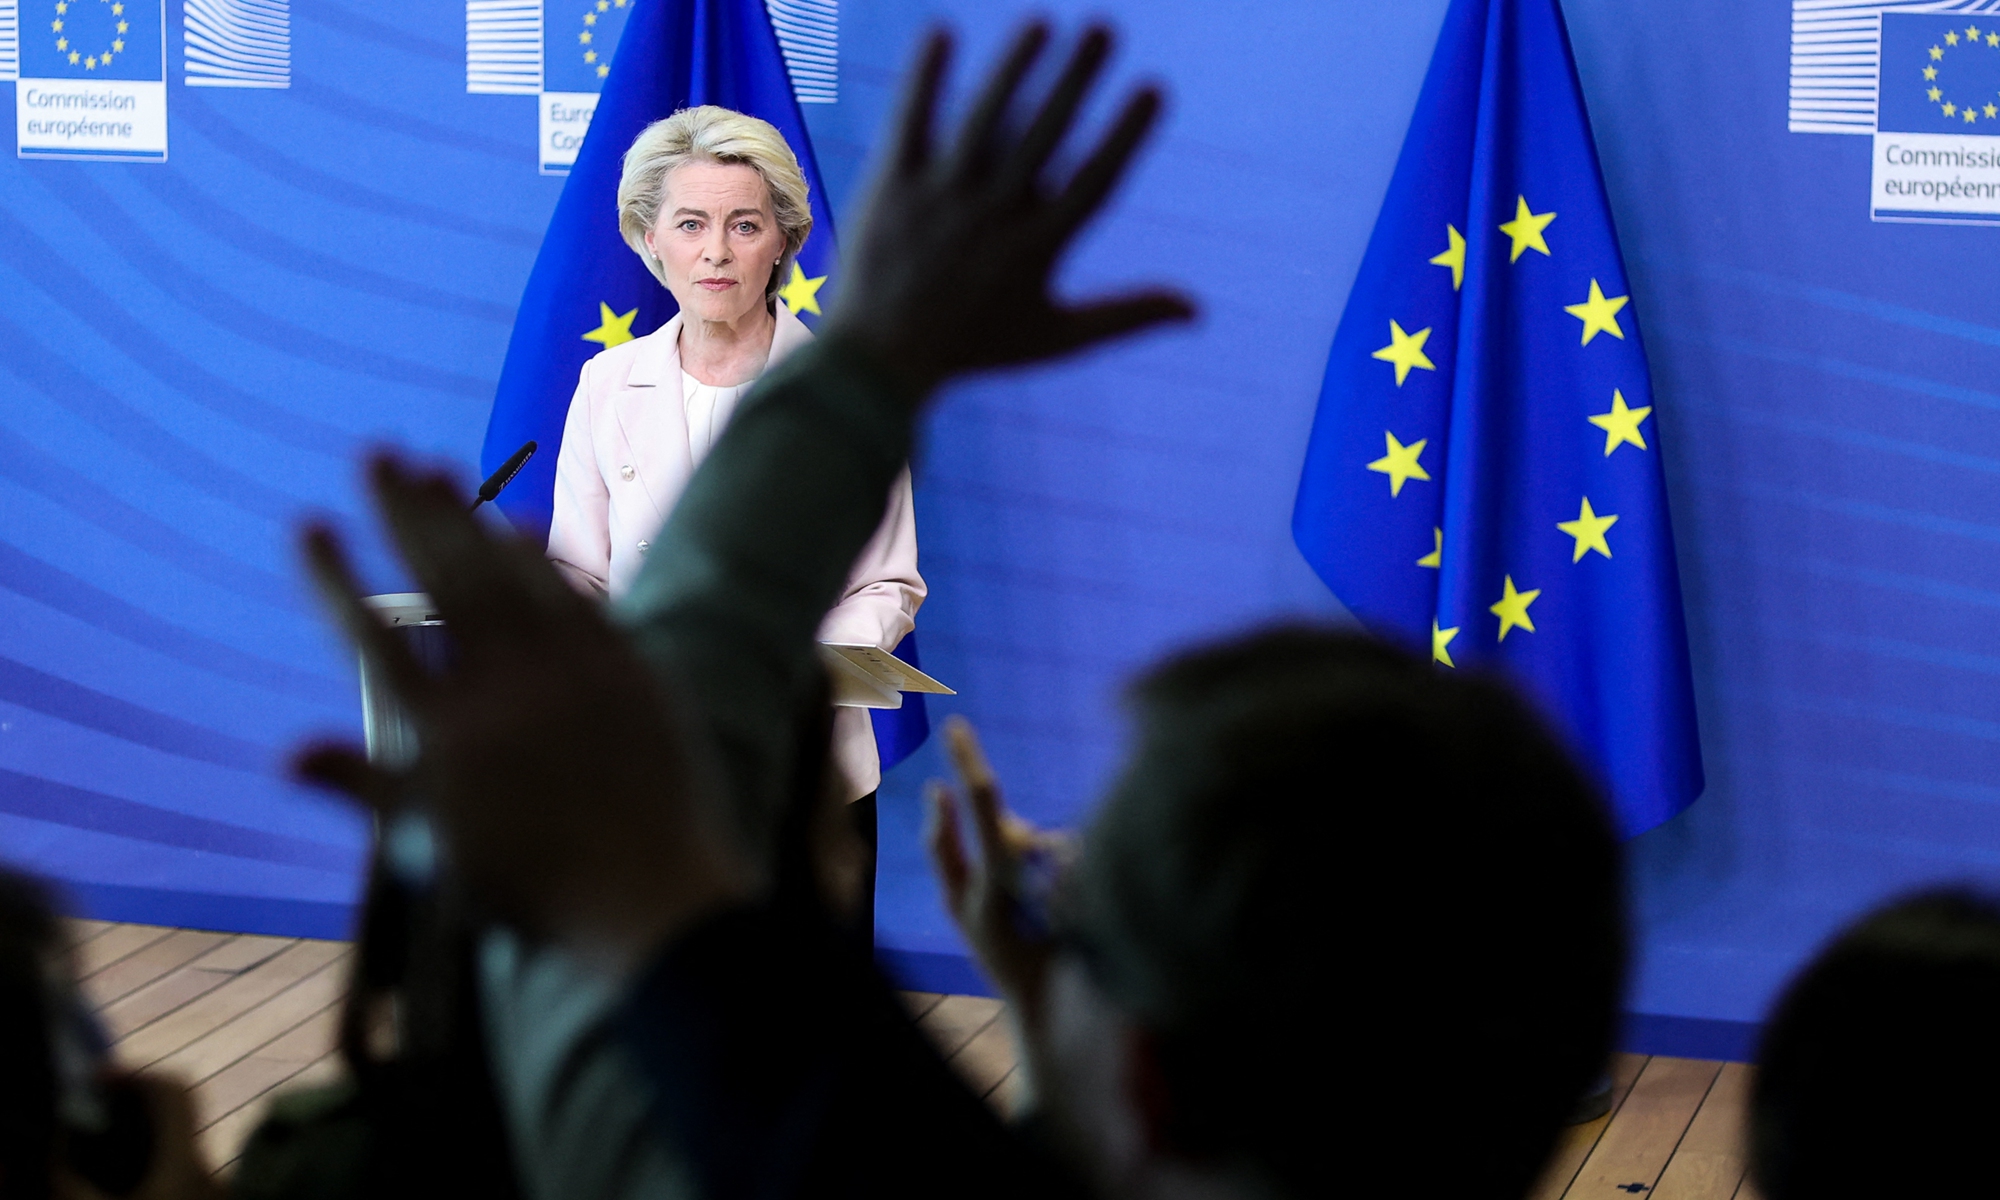 

European Commission President Ursula von der Leyen makes a statement in Brussels on April 27, 2022, following the decision by Russian energy giant Gazprom to halt gas shipments to Poland and Bulgaria. The EU is preparing a sixth round of sanctions against Russia in retaliation for its attack on Ukraine, and is mulling sanctions against oil.Photo: AFP